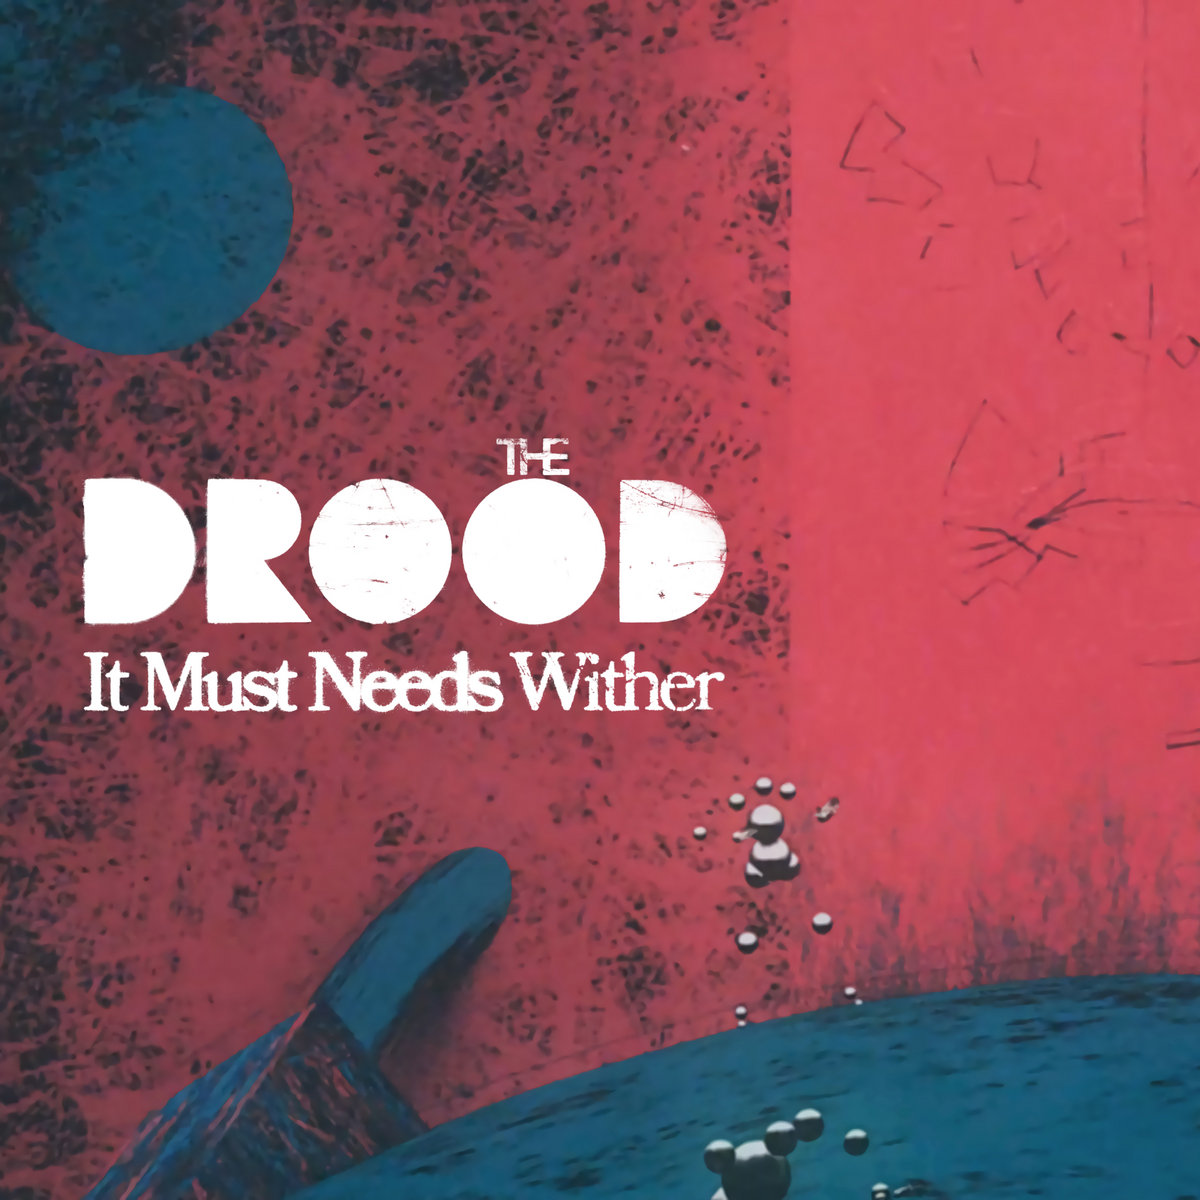 The Drood Pays Tribute So Shakespeare In “It Must Needs Wither”